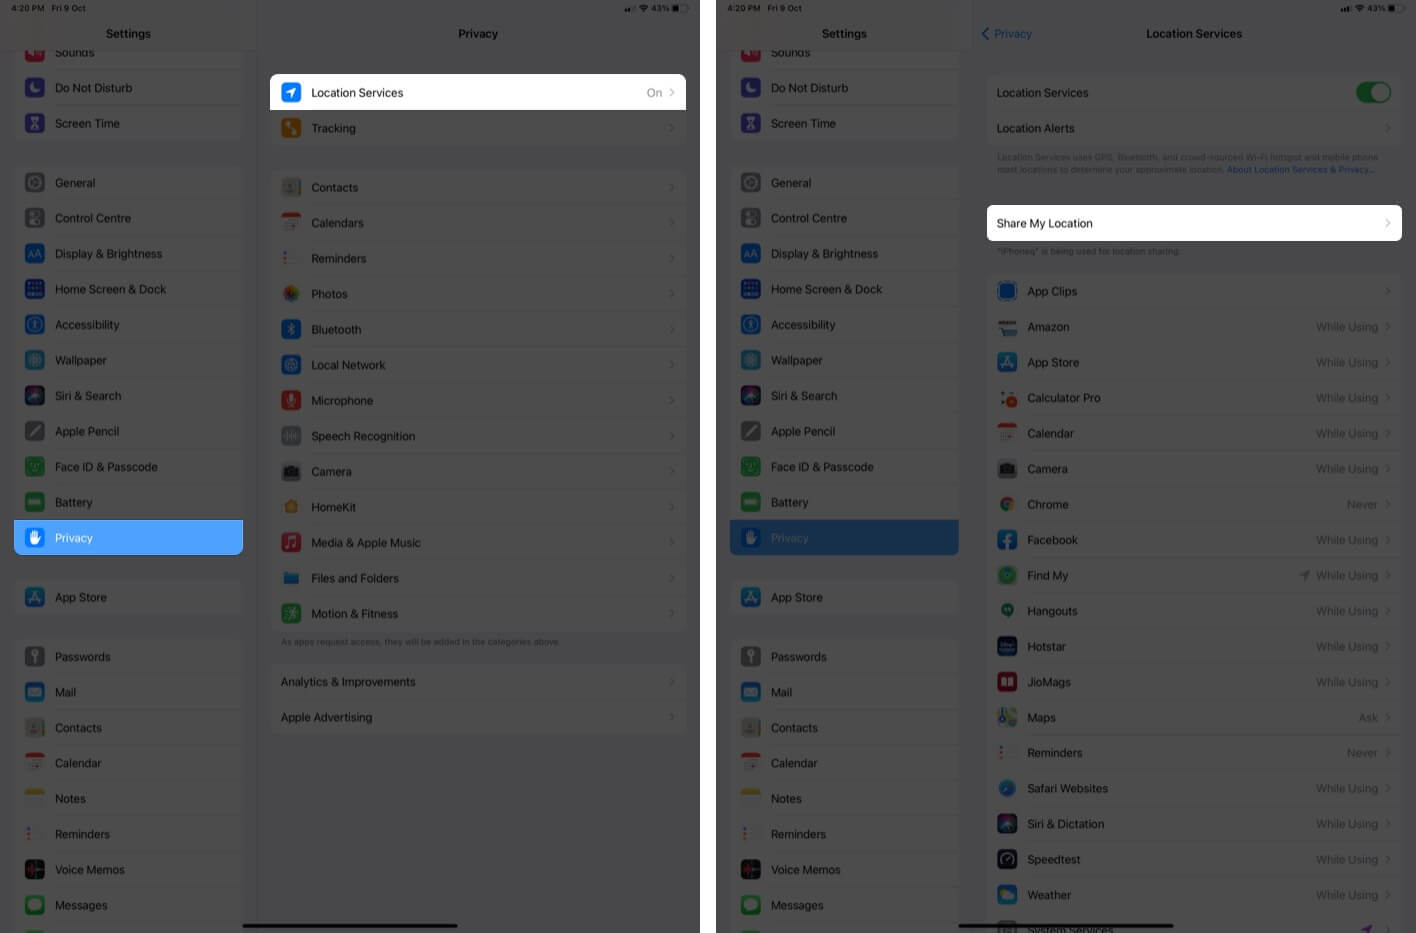 tap-on-privacy-select-location-services-and-then-tap-on-share-my-location-in-settings-on-ipad